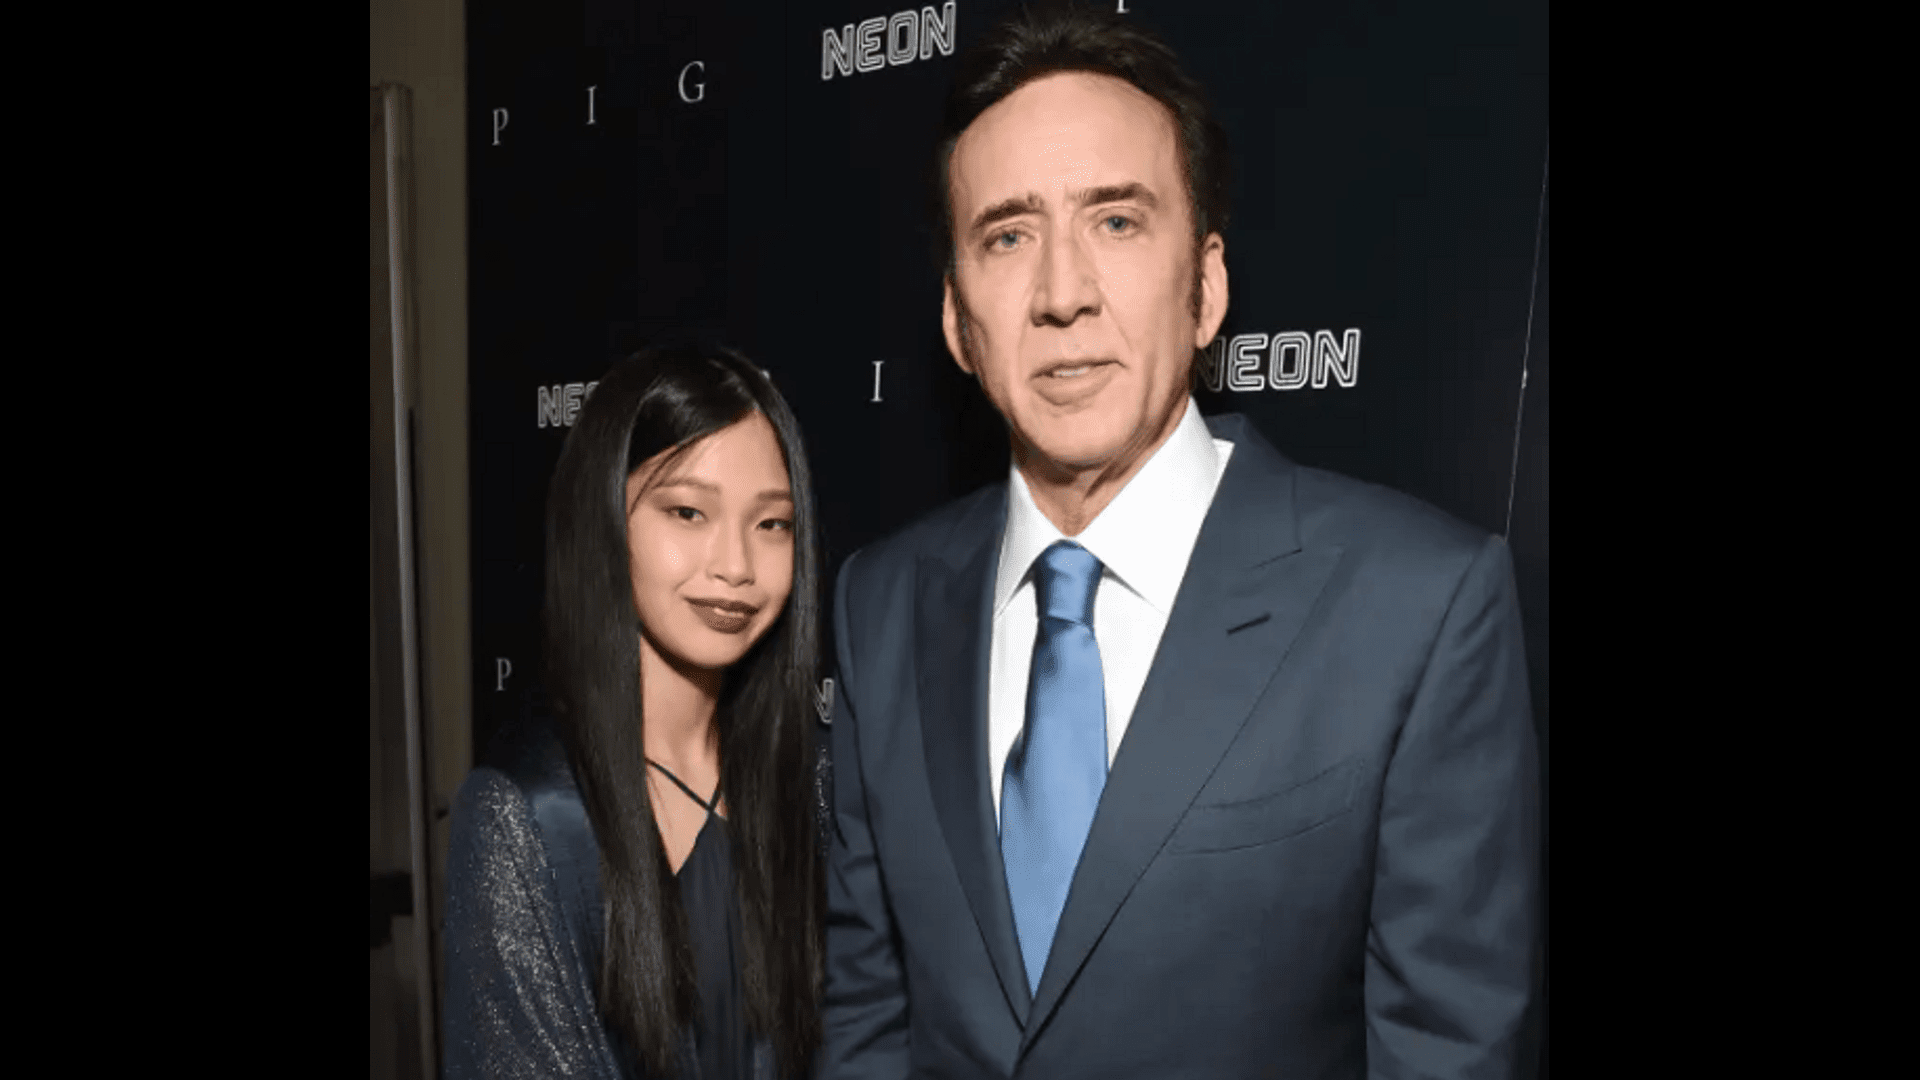 Nicolas Cage Reveals the Secret of His First Daughter's Name